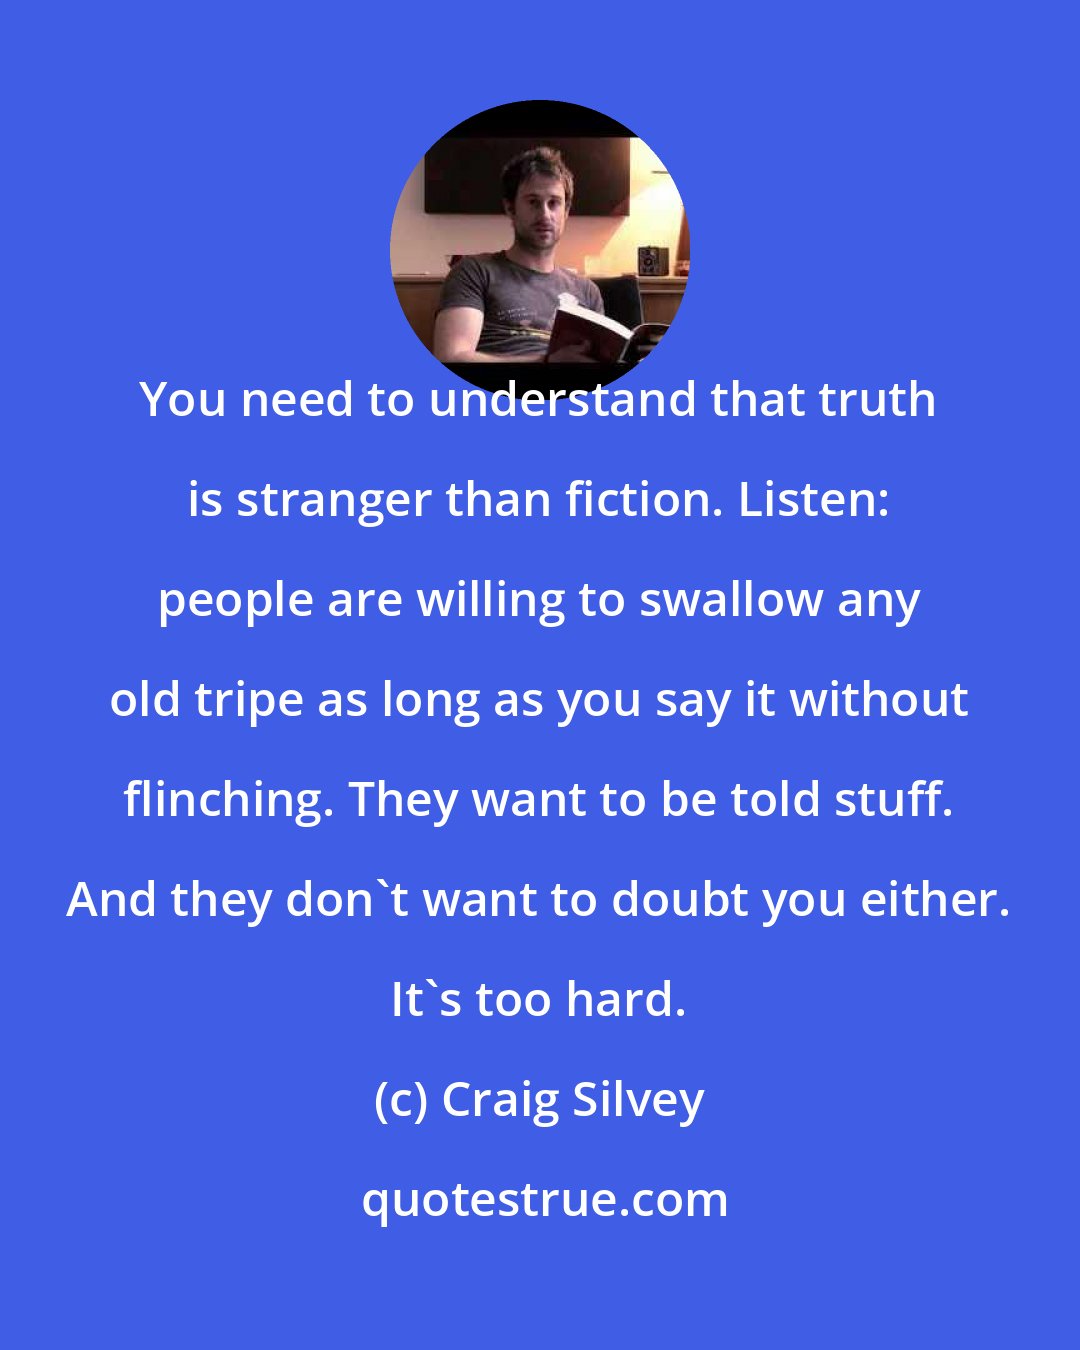 Craig Silvey: You need to understand that truth is stranger than fiction. Listen: people are willing to swallow any old tripe as long as you say it without flinching. They want to be told stuff. And they don't want to doubt you either. It's too hard.